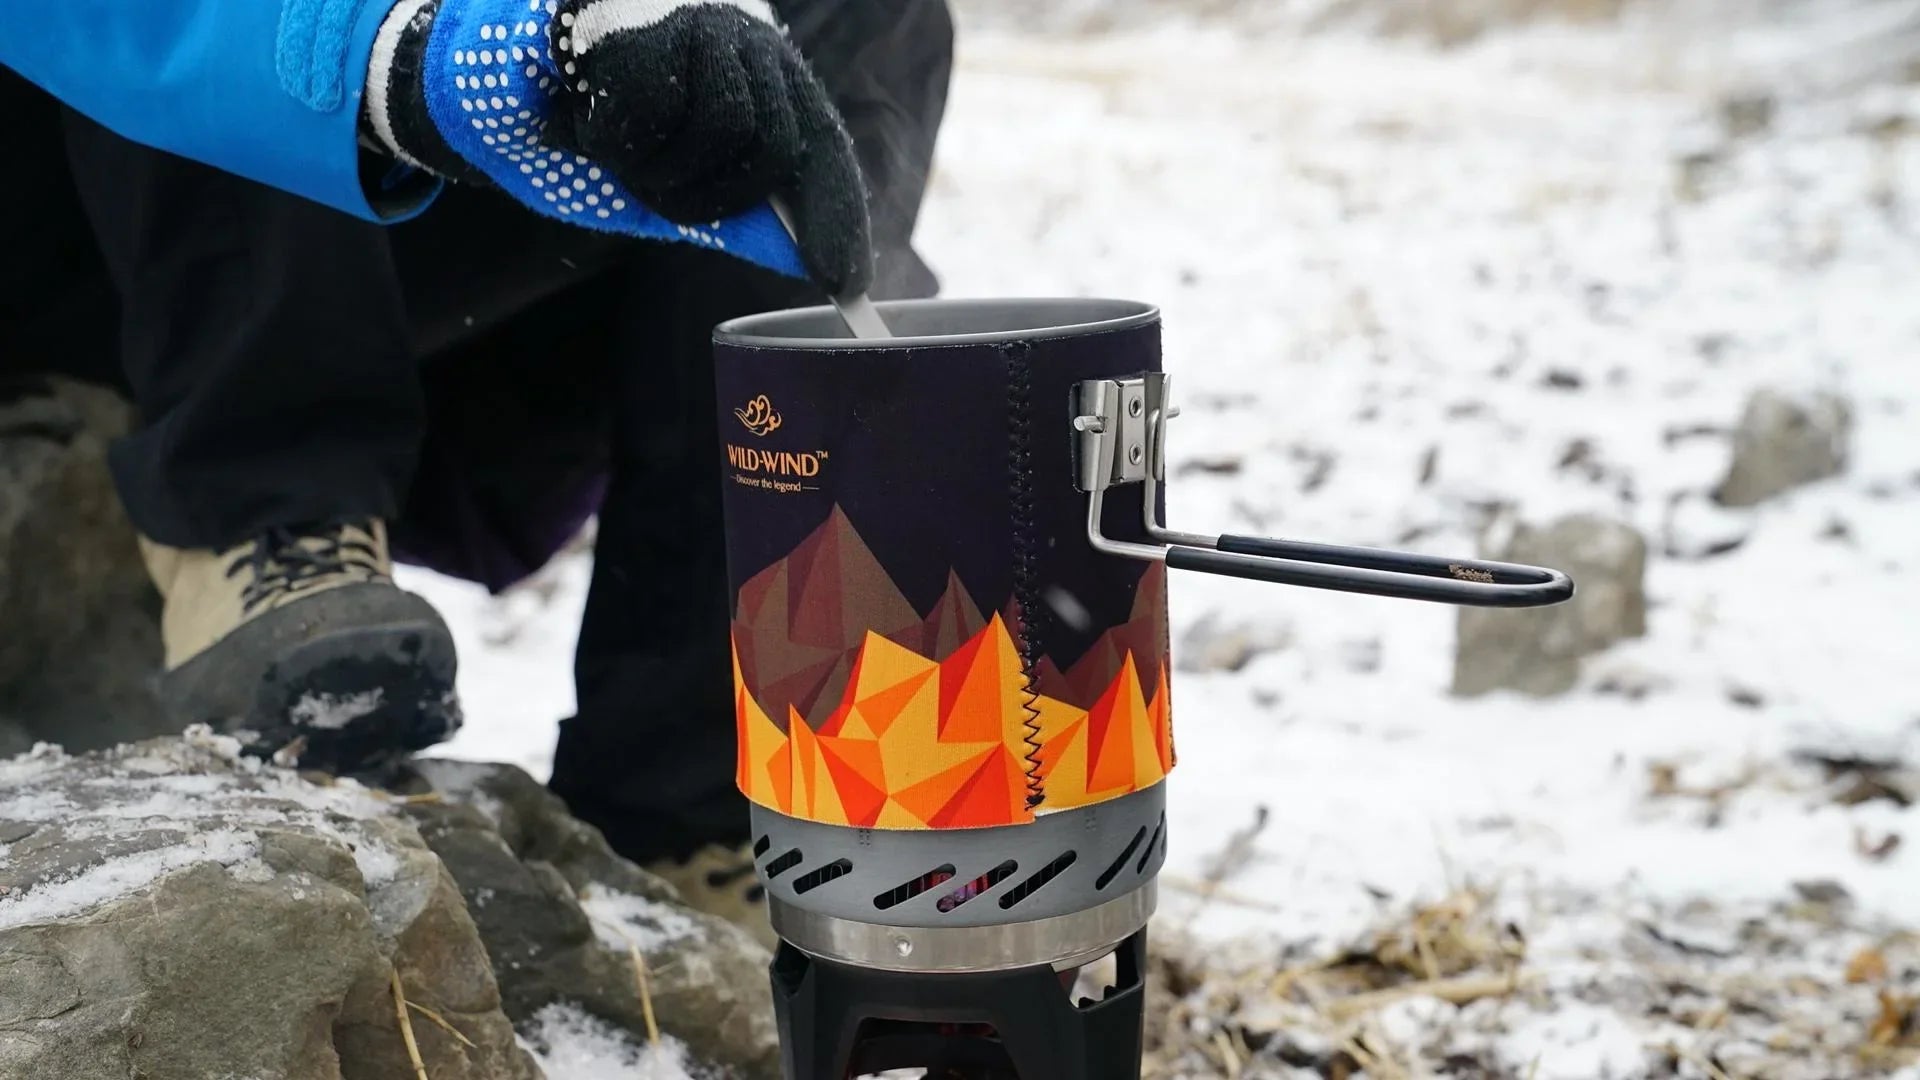 Portable Stove for Camping - Backpacking Stove, Propane Burner & Camping Gas Stove - Lightweight Backpacking Stove for Outdoor